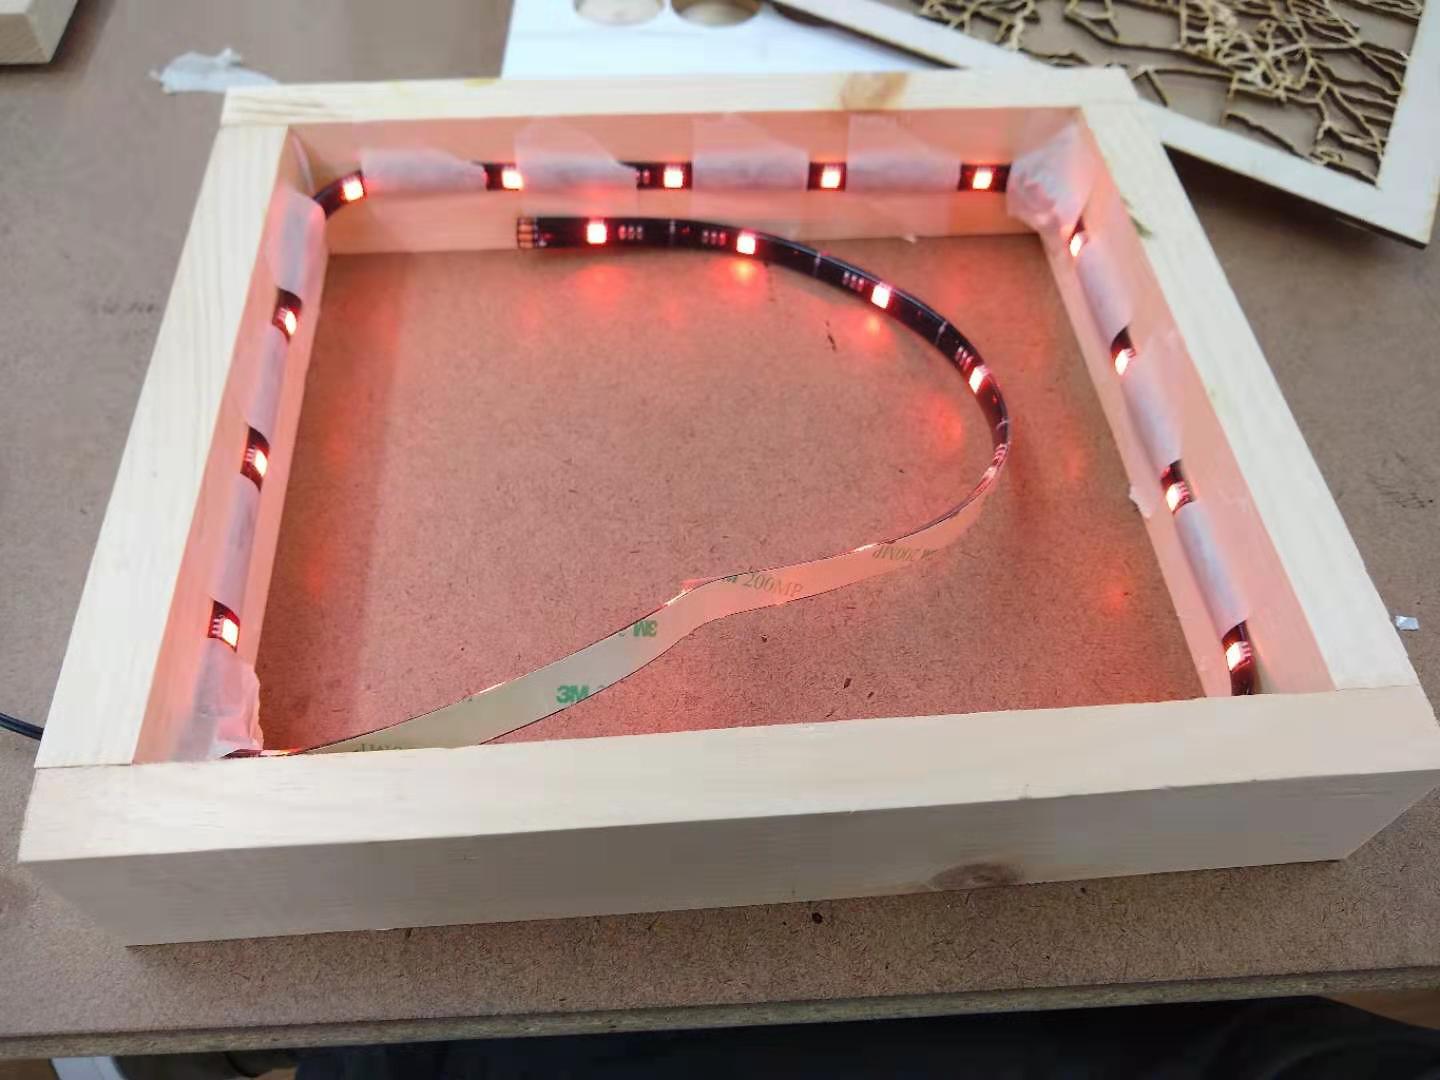 A box frame with LEDs taped to the inside.